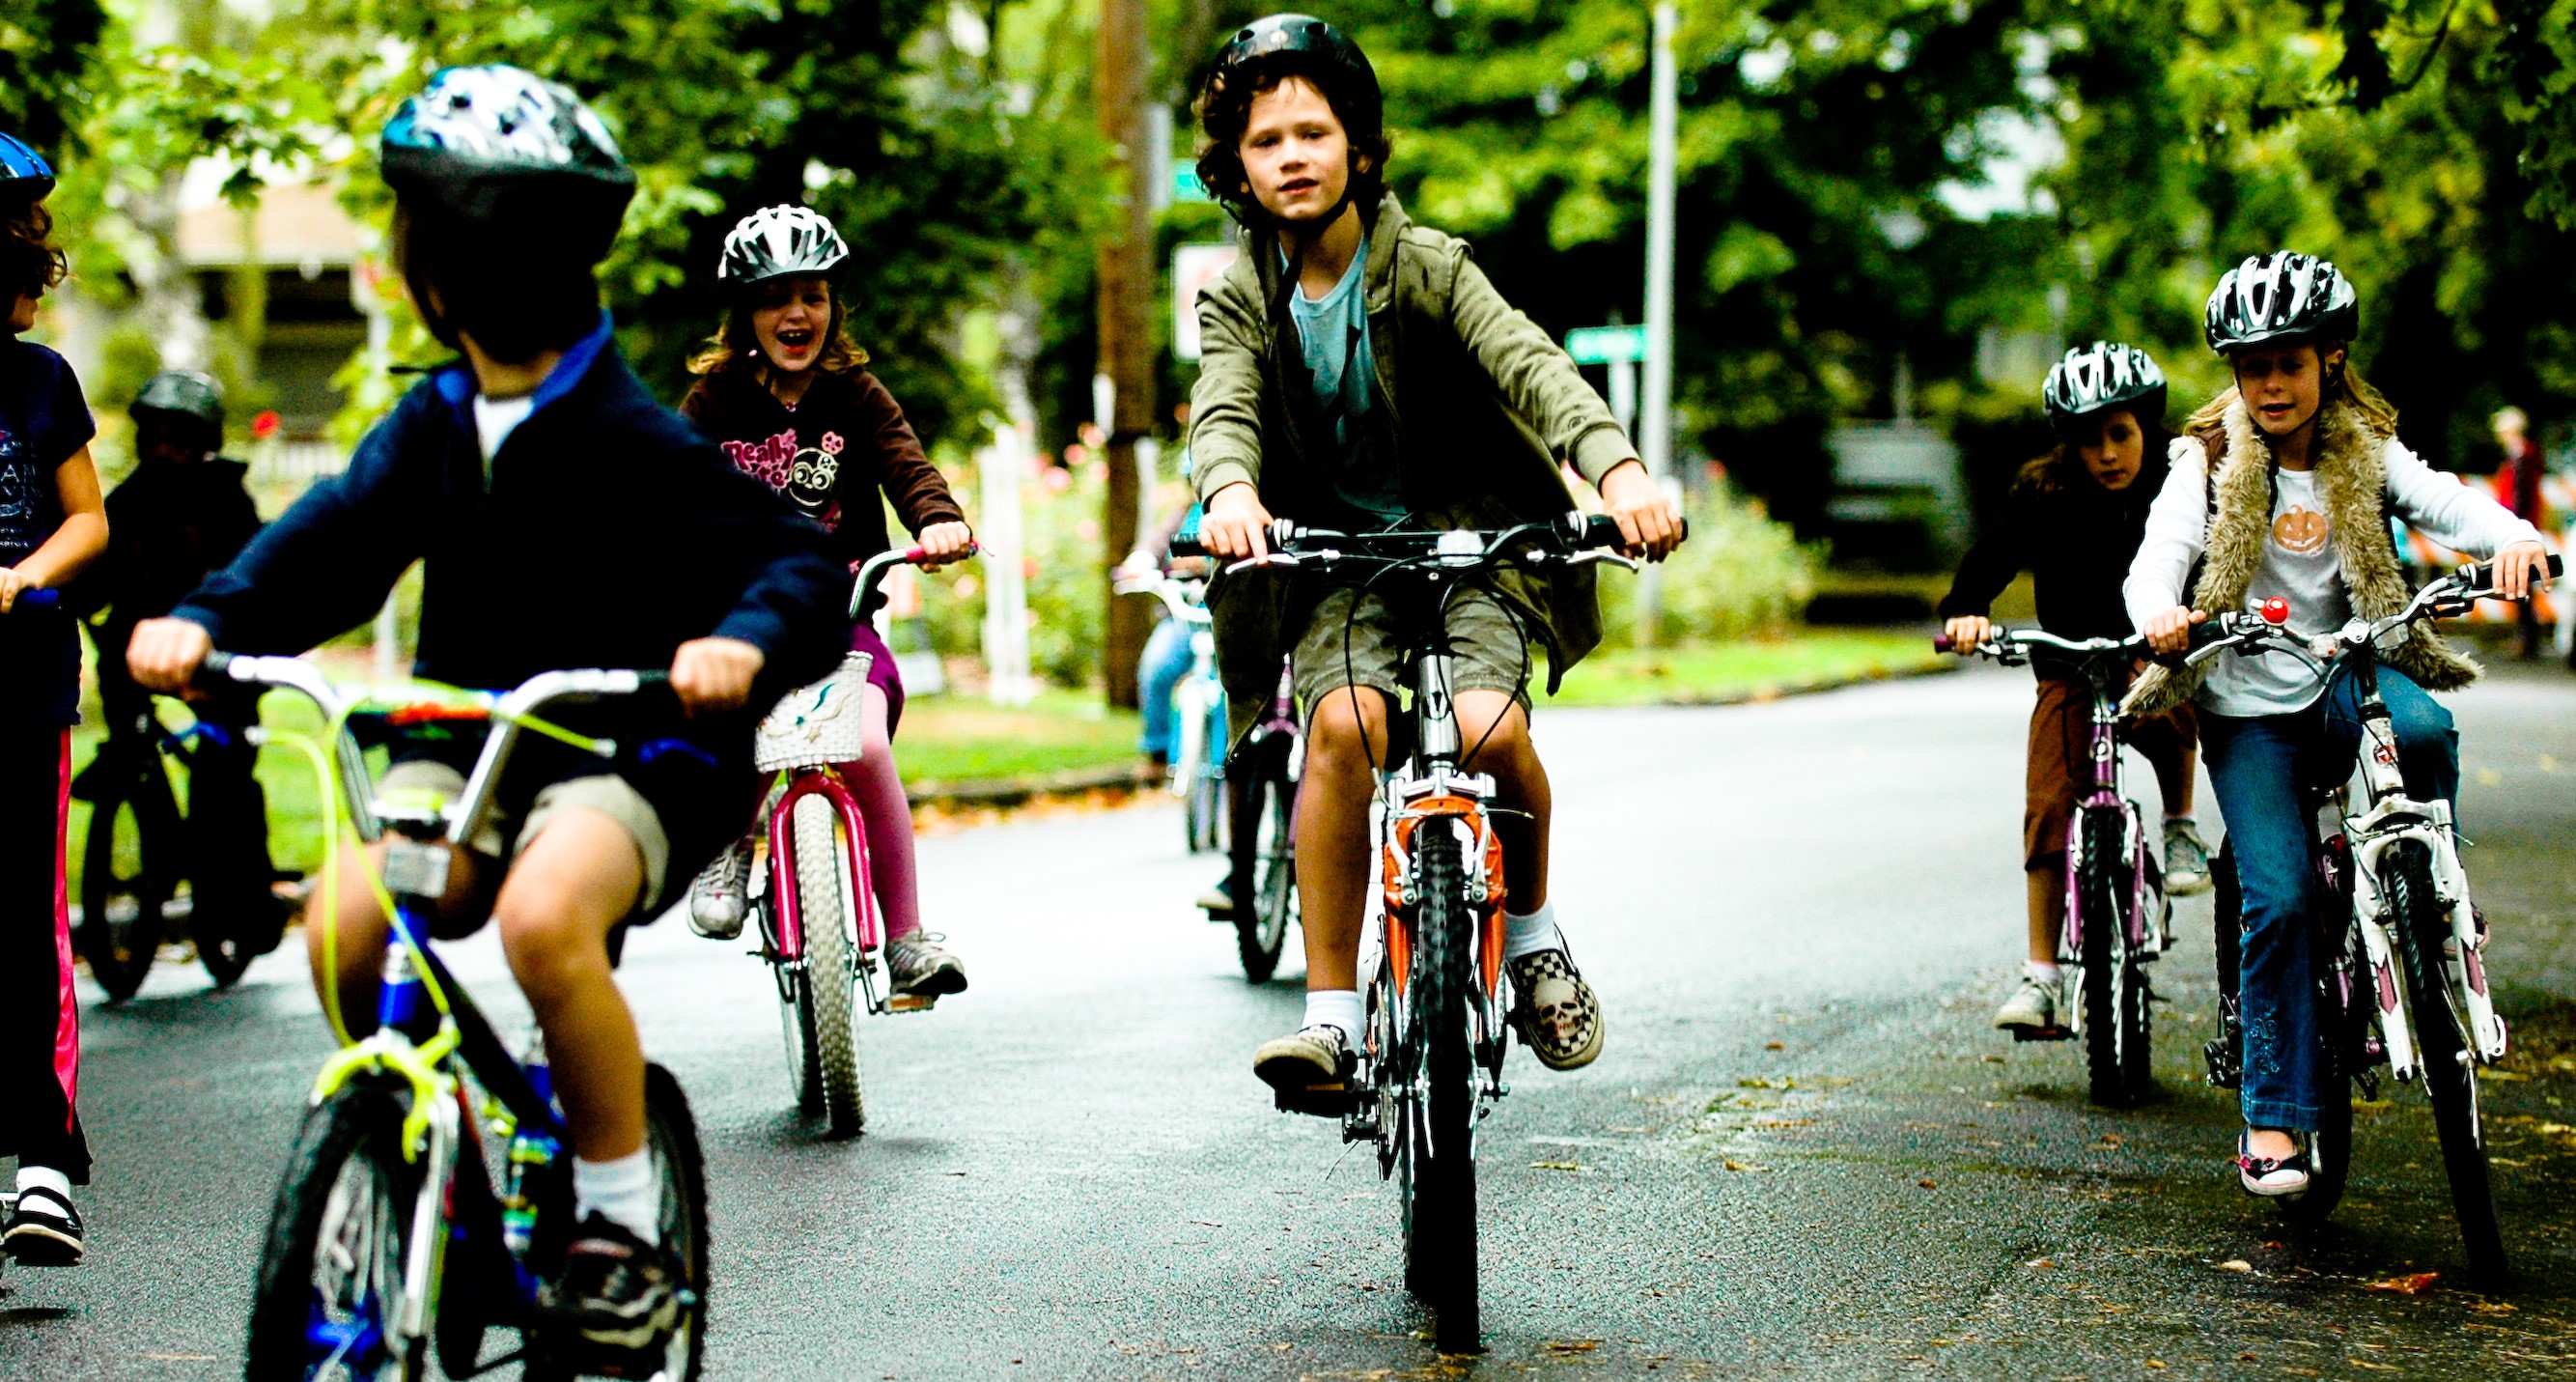 Image of children riding bicycles